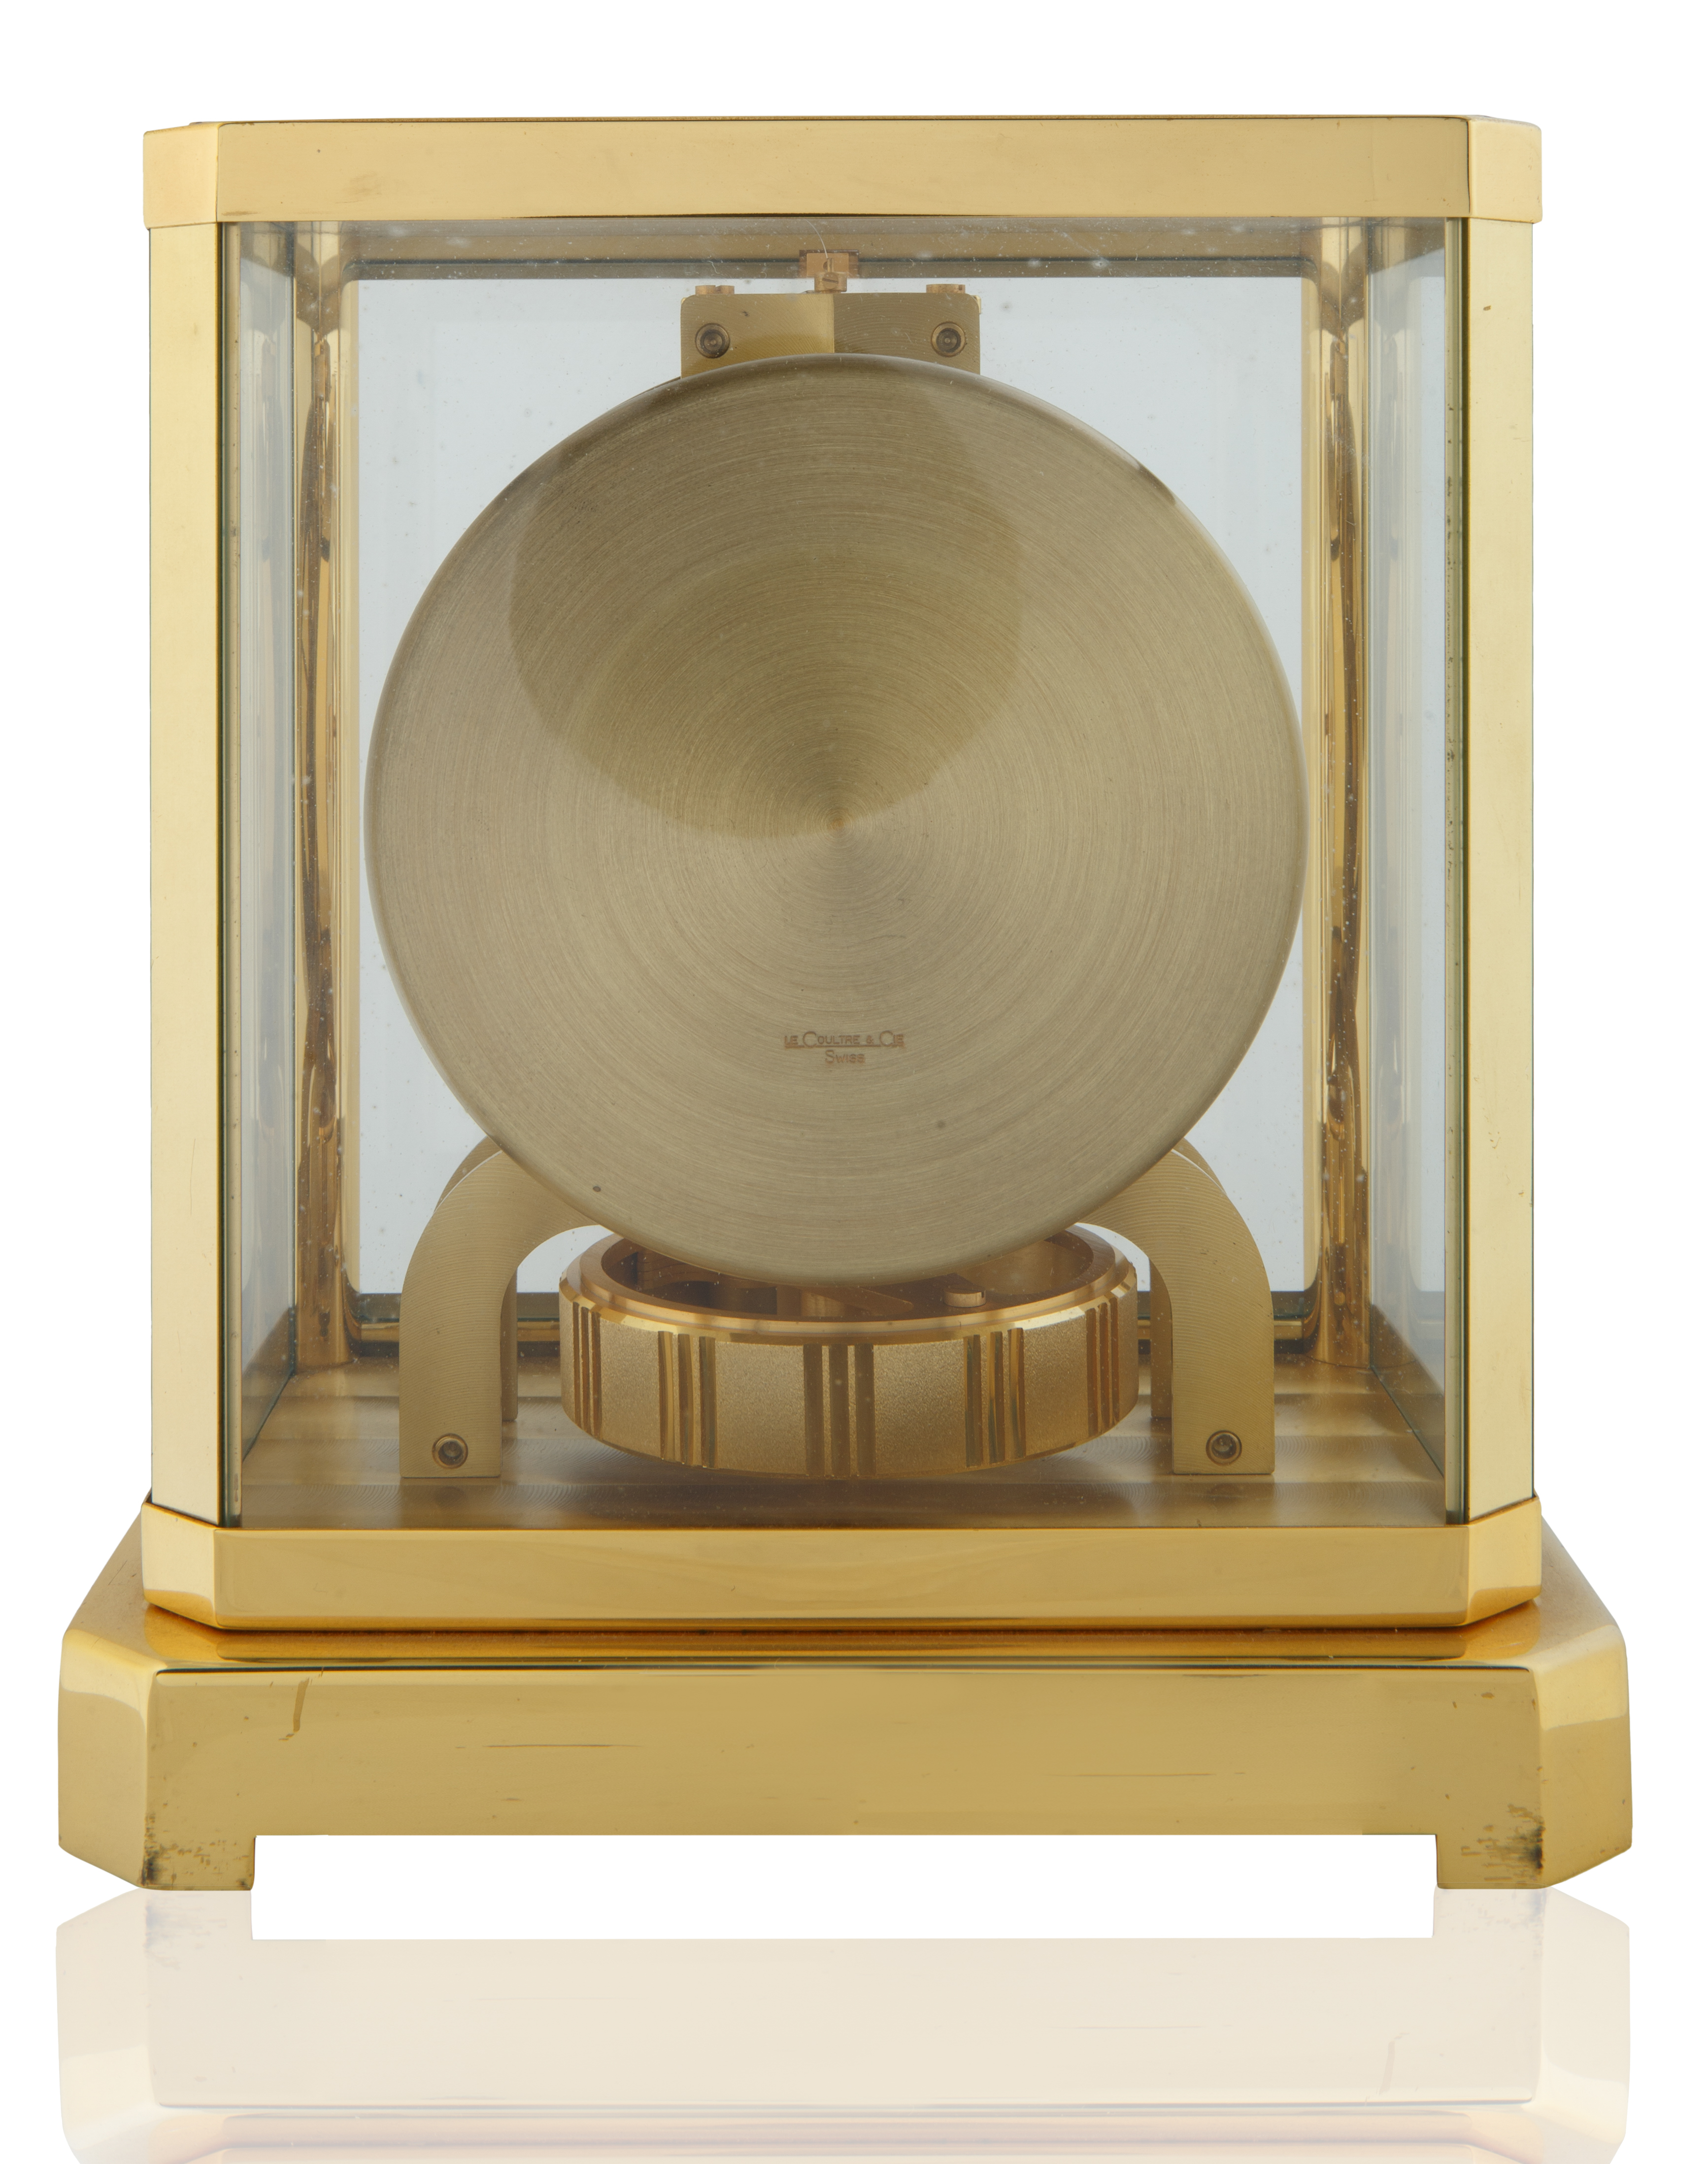 CLASSIC' LECOULTRE MANTLE CLOCK, ATMOS COLLECTION - Image 4 of 8